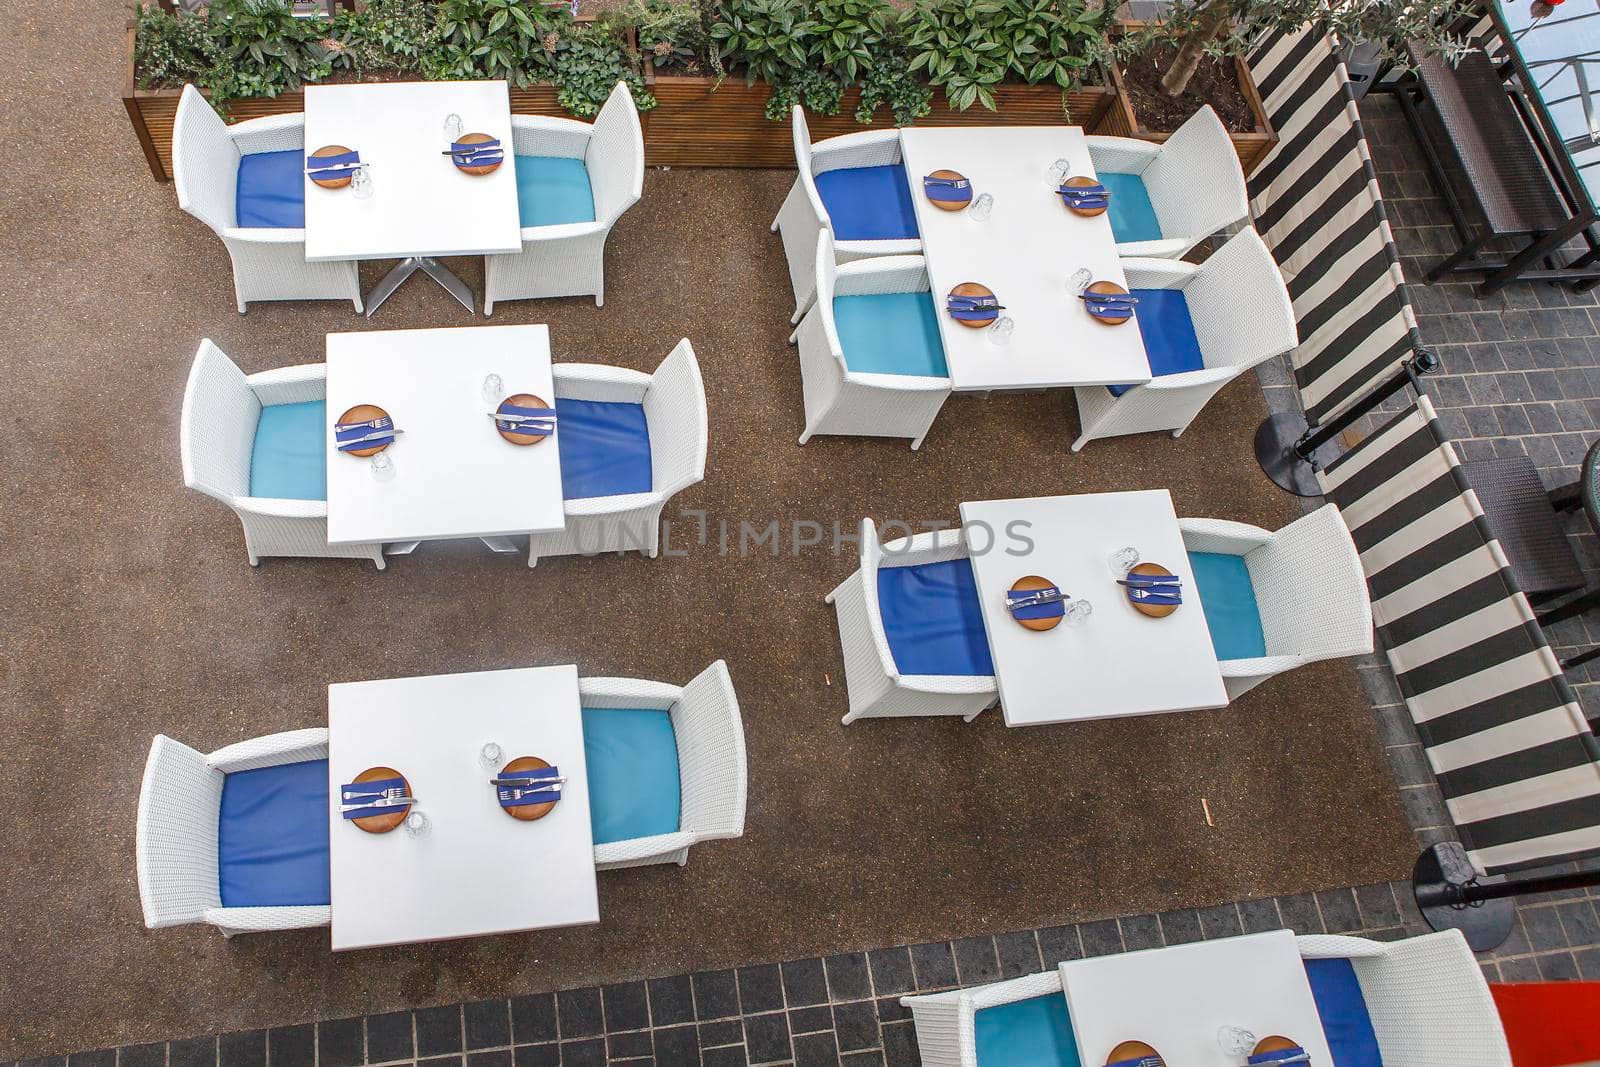 Street cafe, table setting with cutlery items, wicker chairs, top view